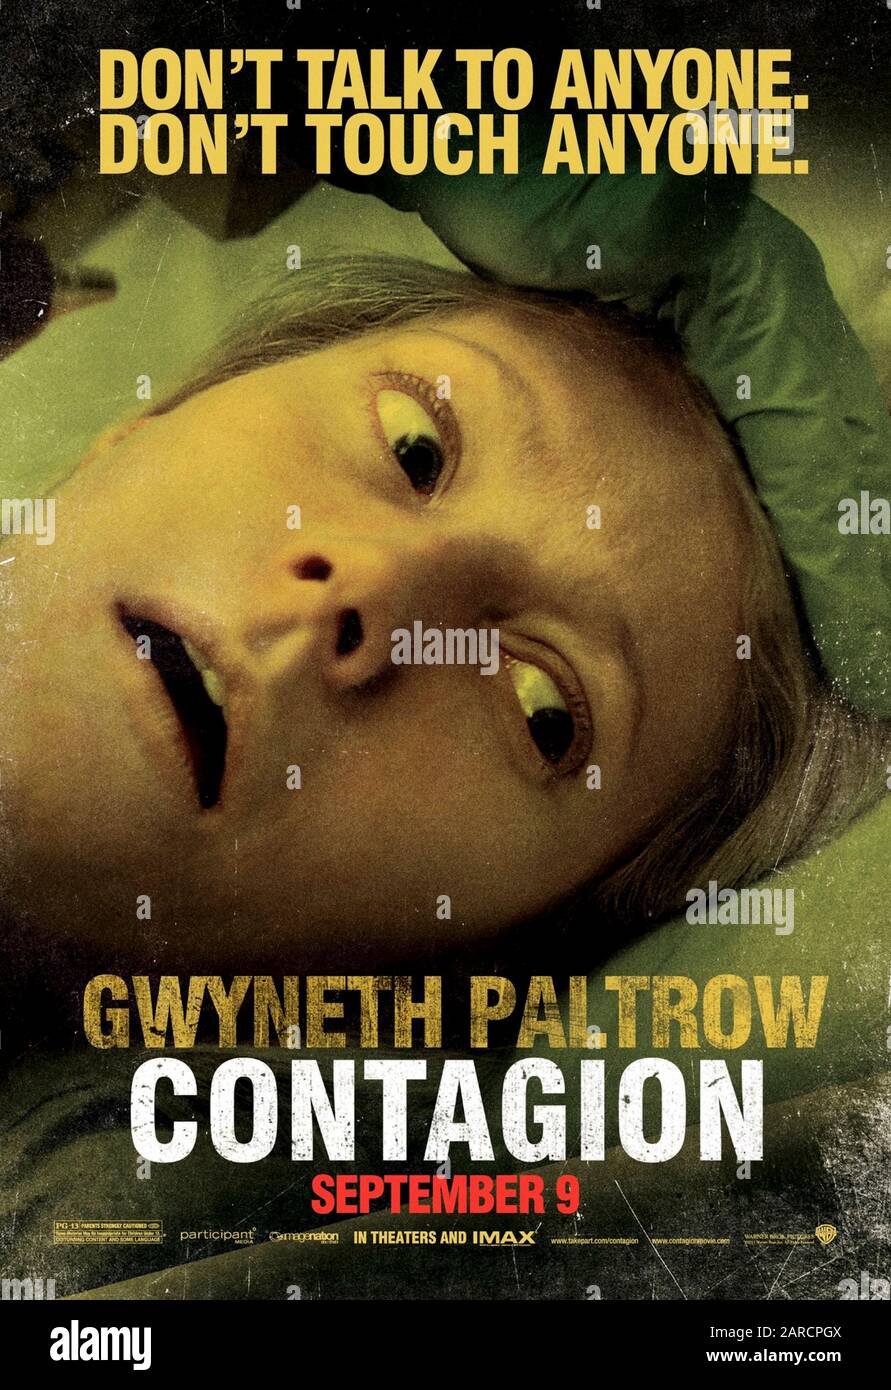 Contagion (2011) directed by Steven Soderbergh and starring Gwyneth Paltrow as Elizabeth 'Beth' Emhoff in this accurate portrayal of the spread of a deadly virus and resulting pandemic. Stock Photo